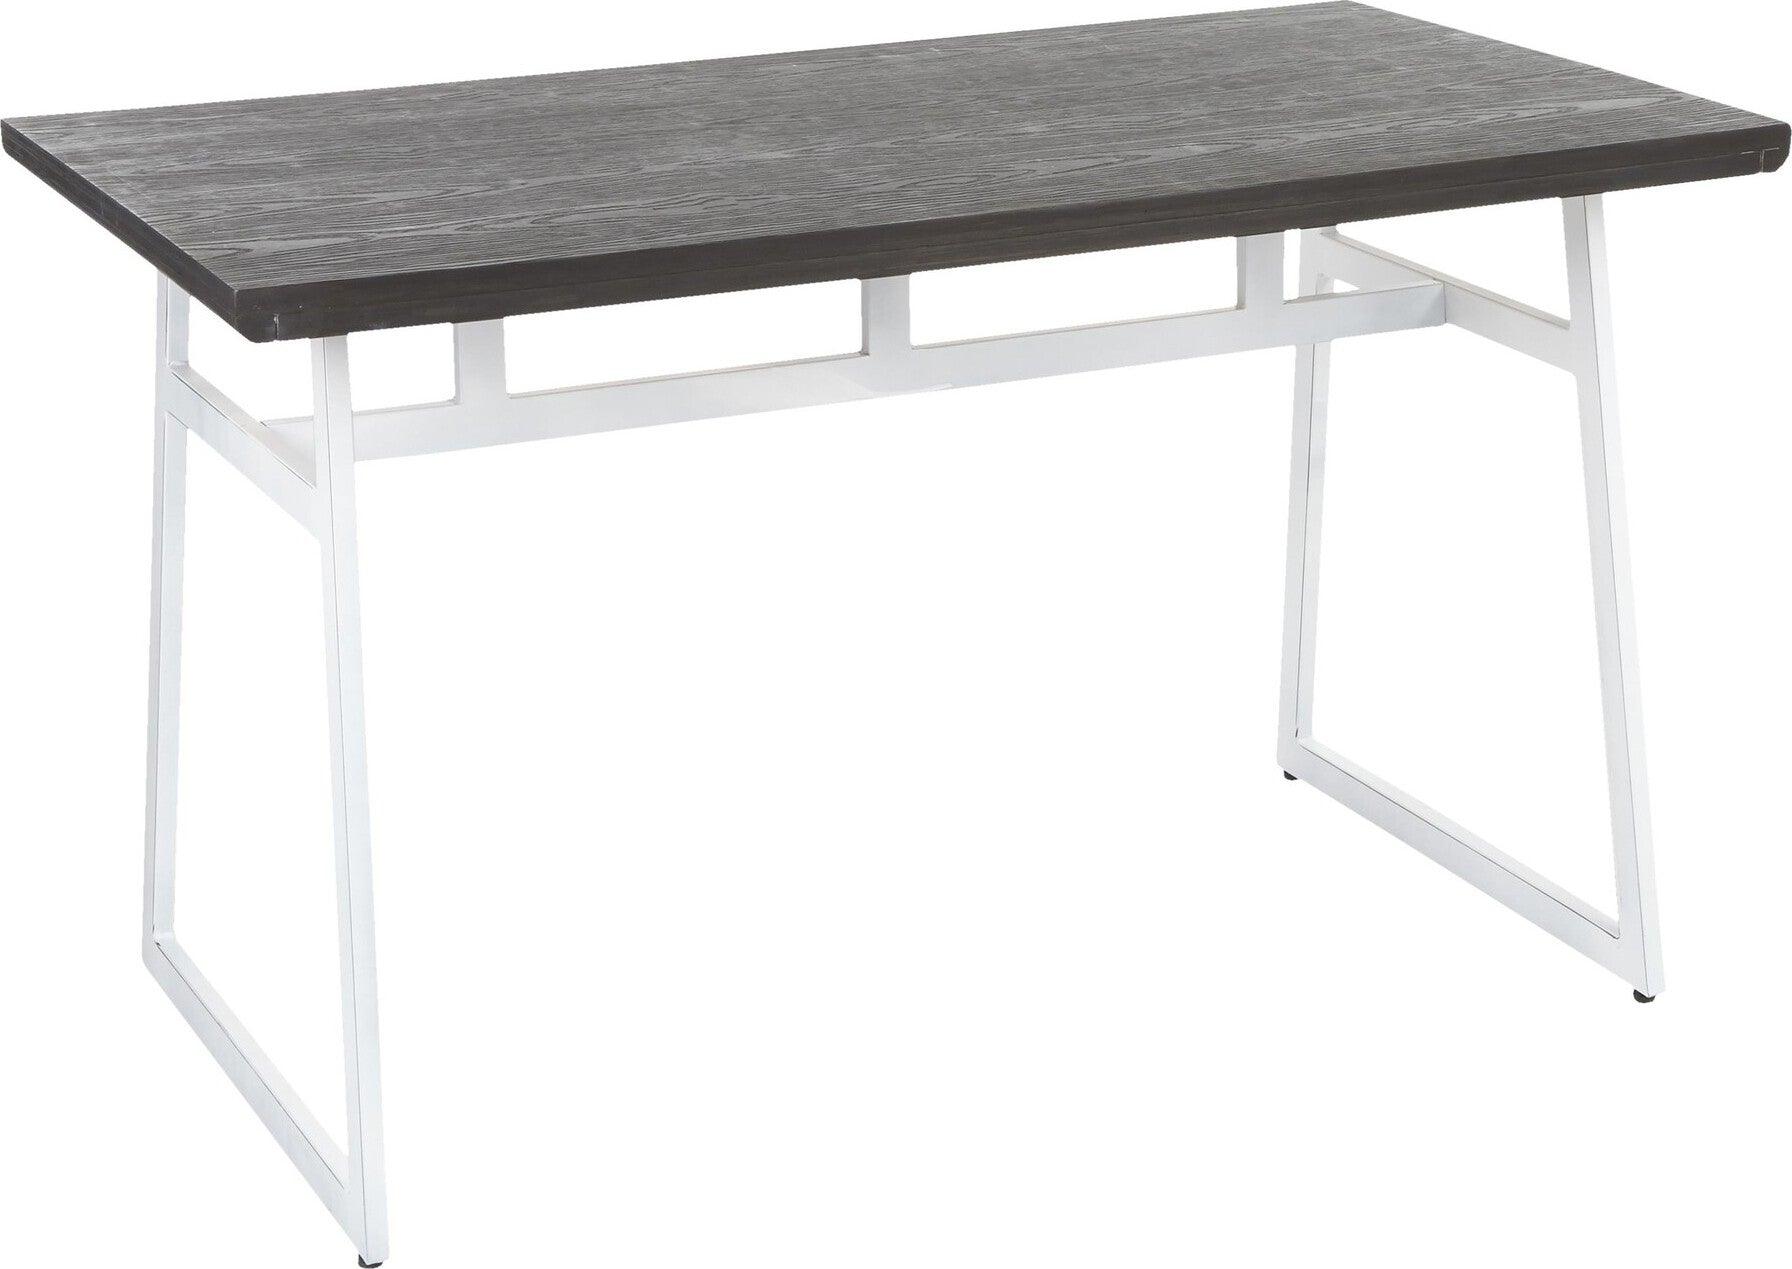 Lumisource Dining Tables - Geo Industrial Dining Table in Vintage White Metal and Espresso Wood-Pressed Grain Bamboo